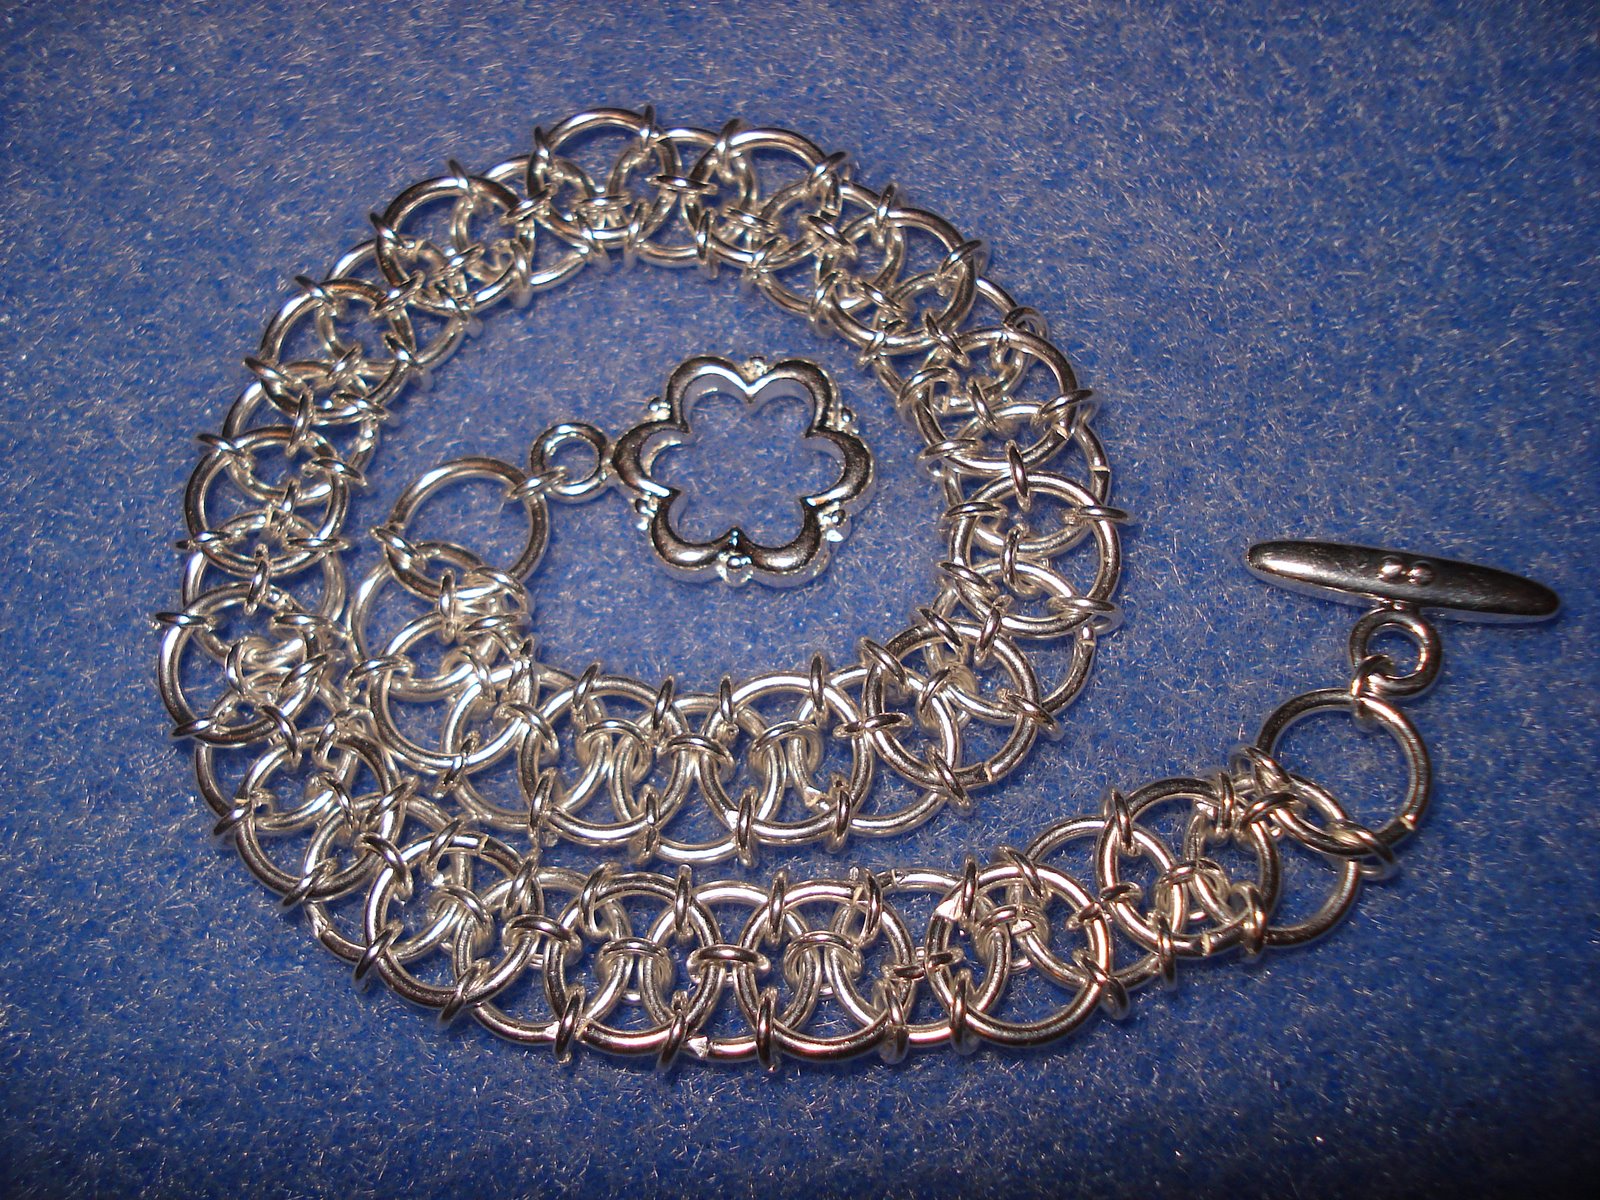 Made a new chain maille bracelet today, using a variant of a Japanese ...